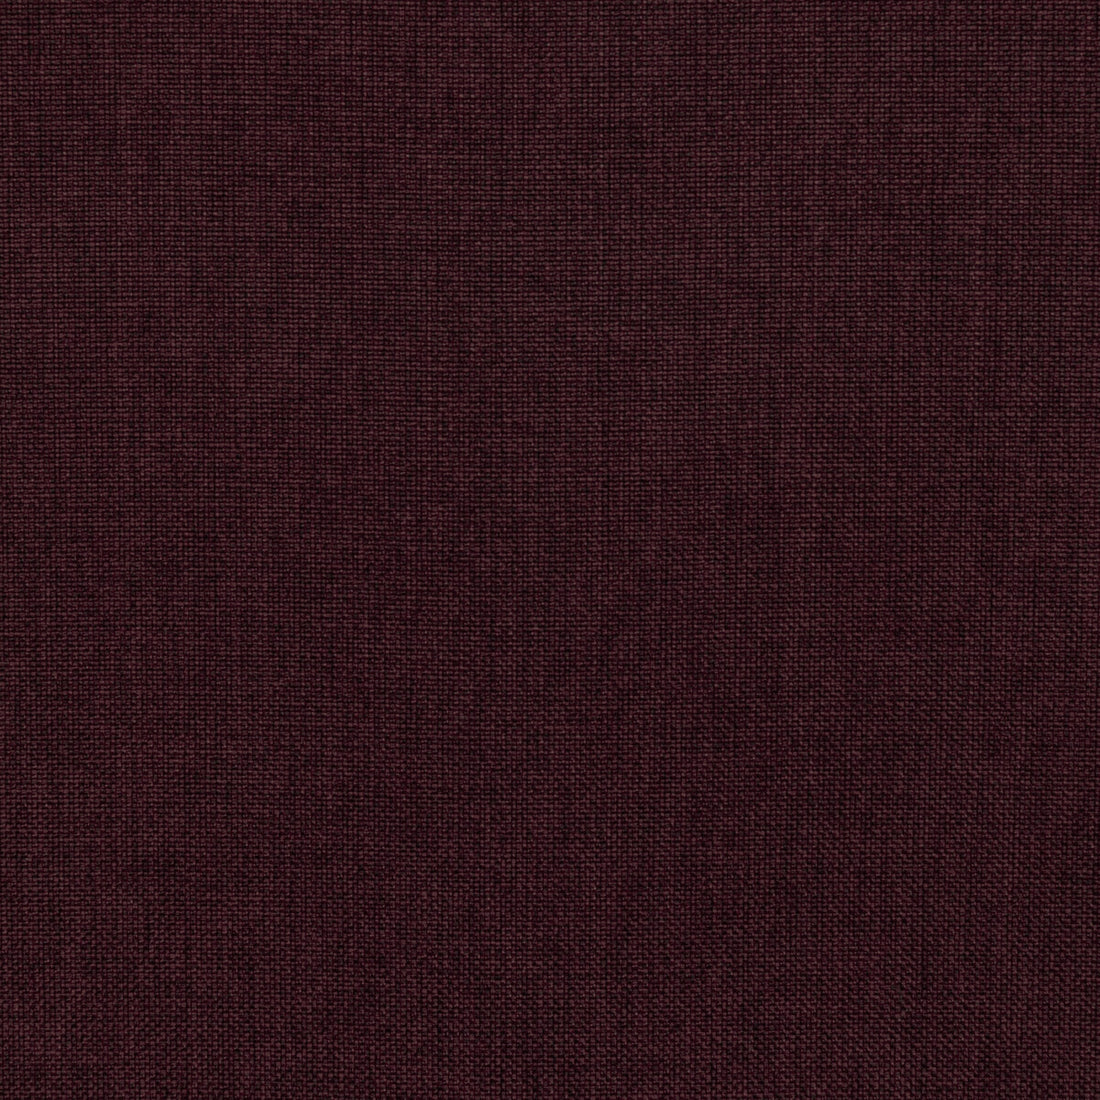 Fortify fabric in mulberry color - pattern 36257.9.0 - by Kravet Contract in the Supreen collection